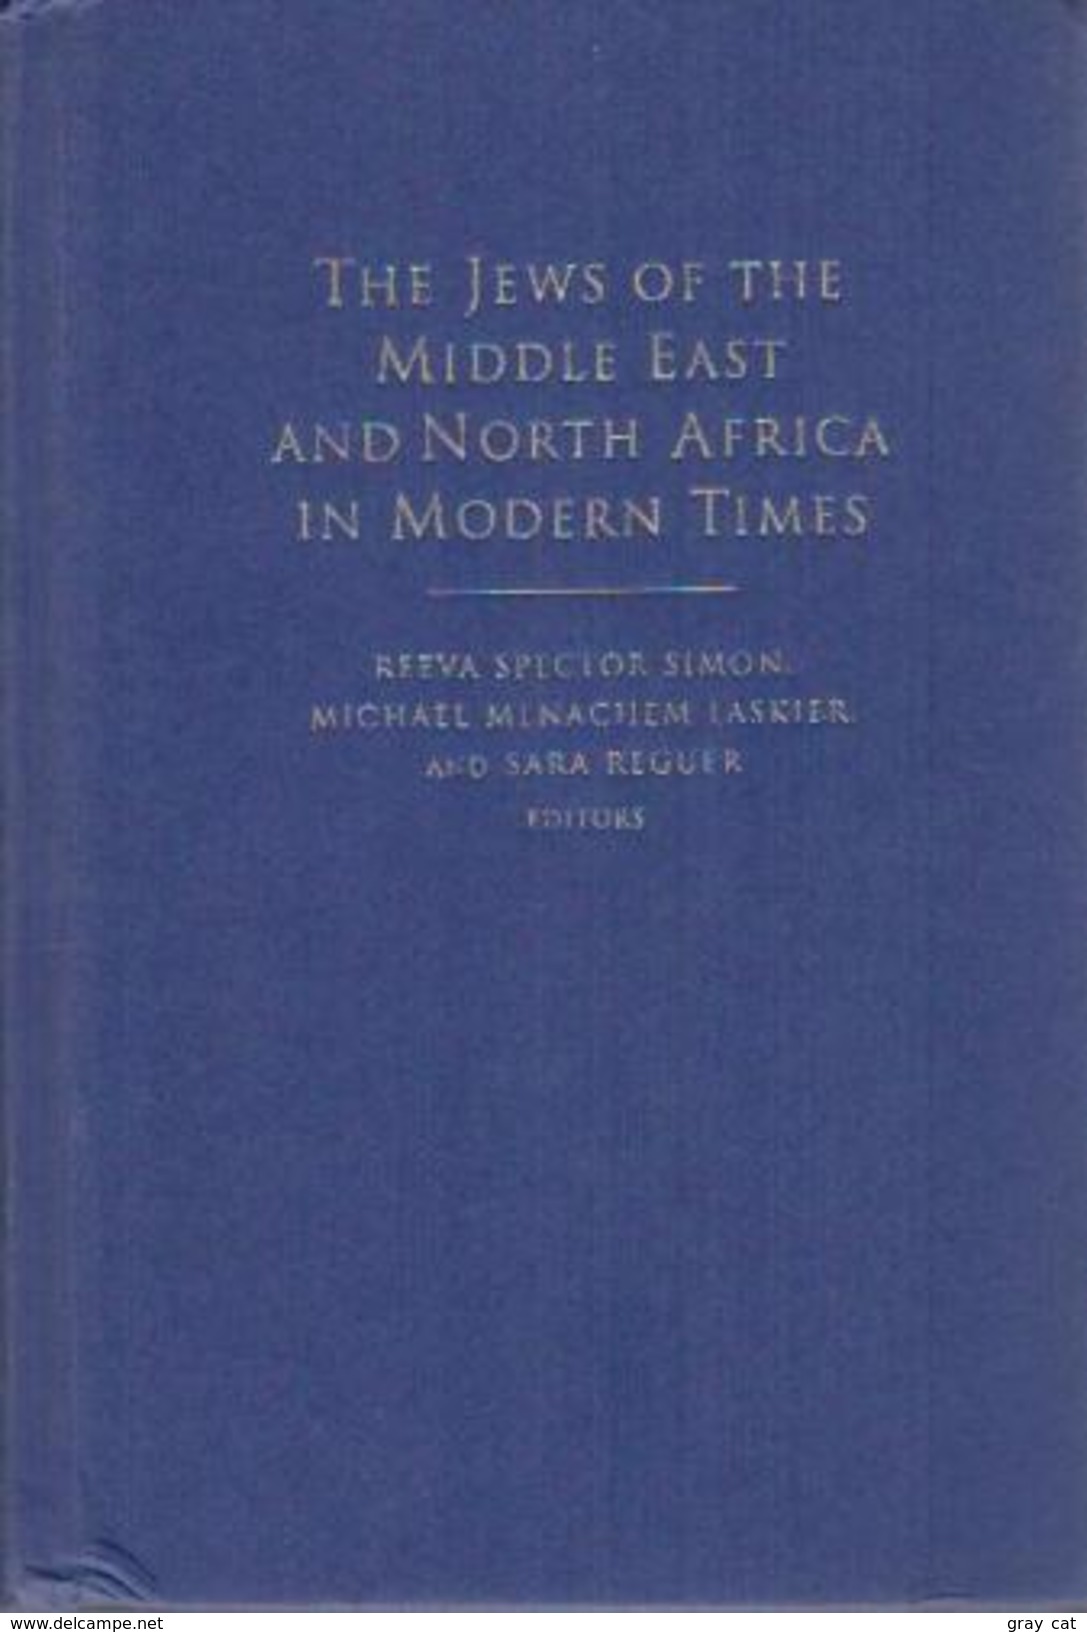 The Jews Of The Middle East And North Africa In Modern Times By Michael Menachem Laskier (ISBN 9780231107969) - Medio Oriente